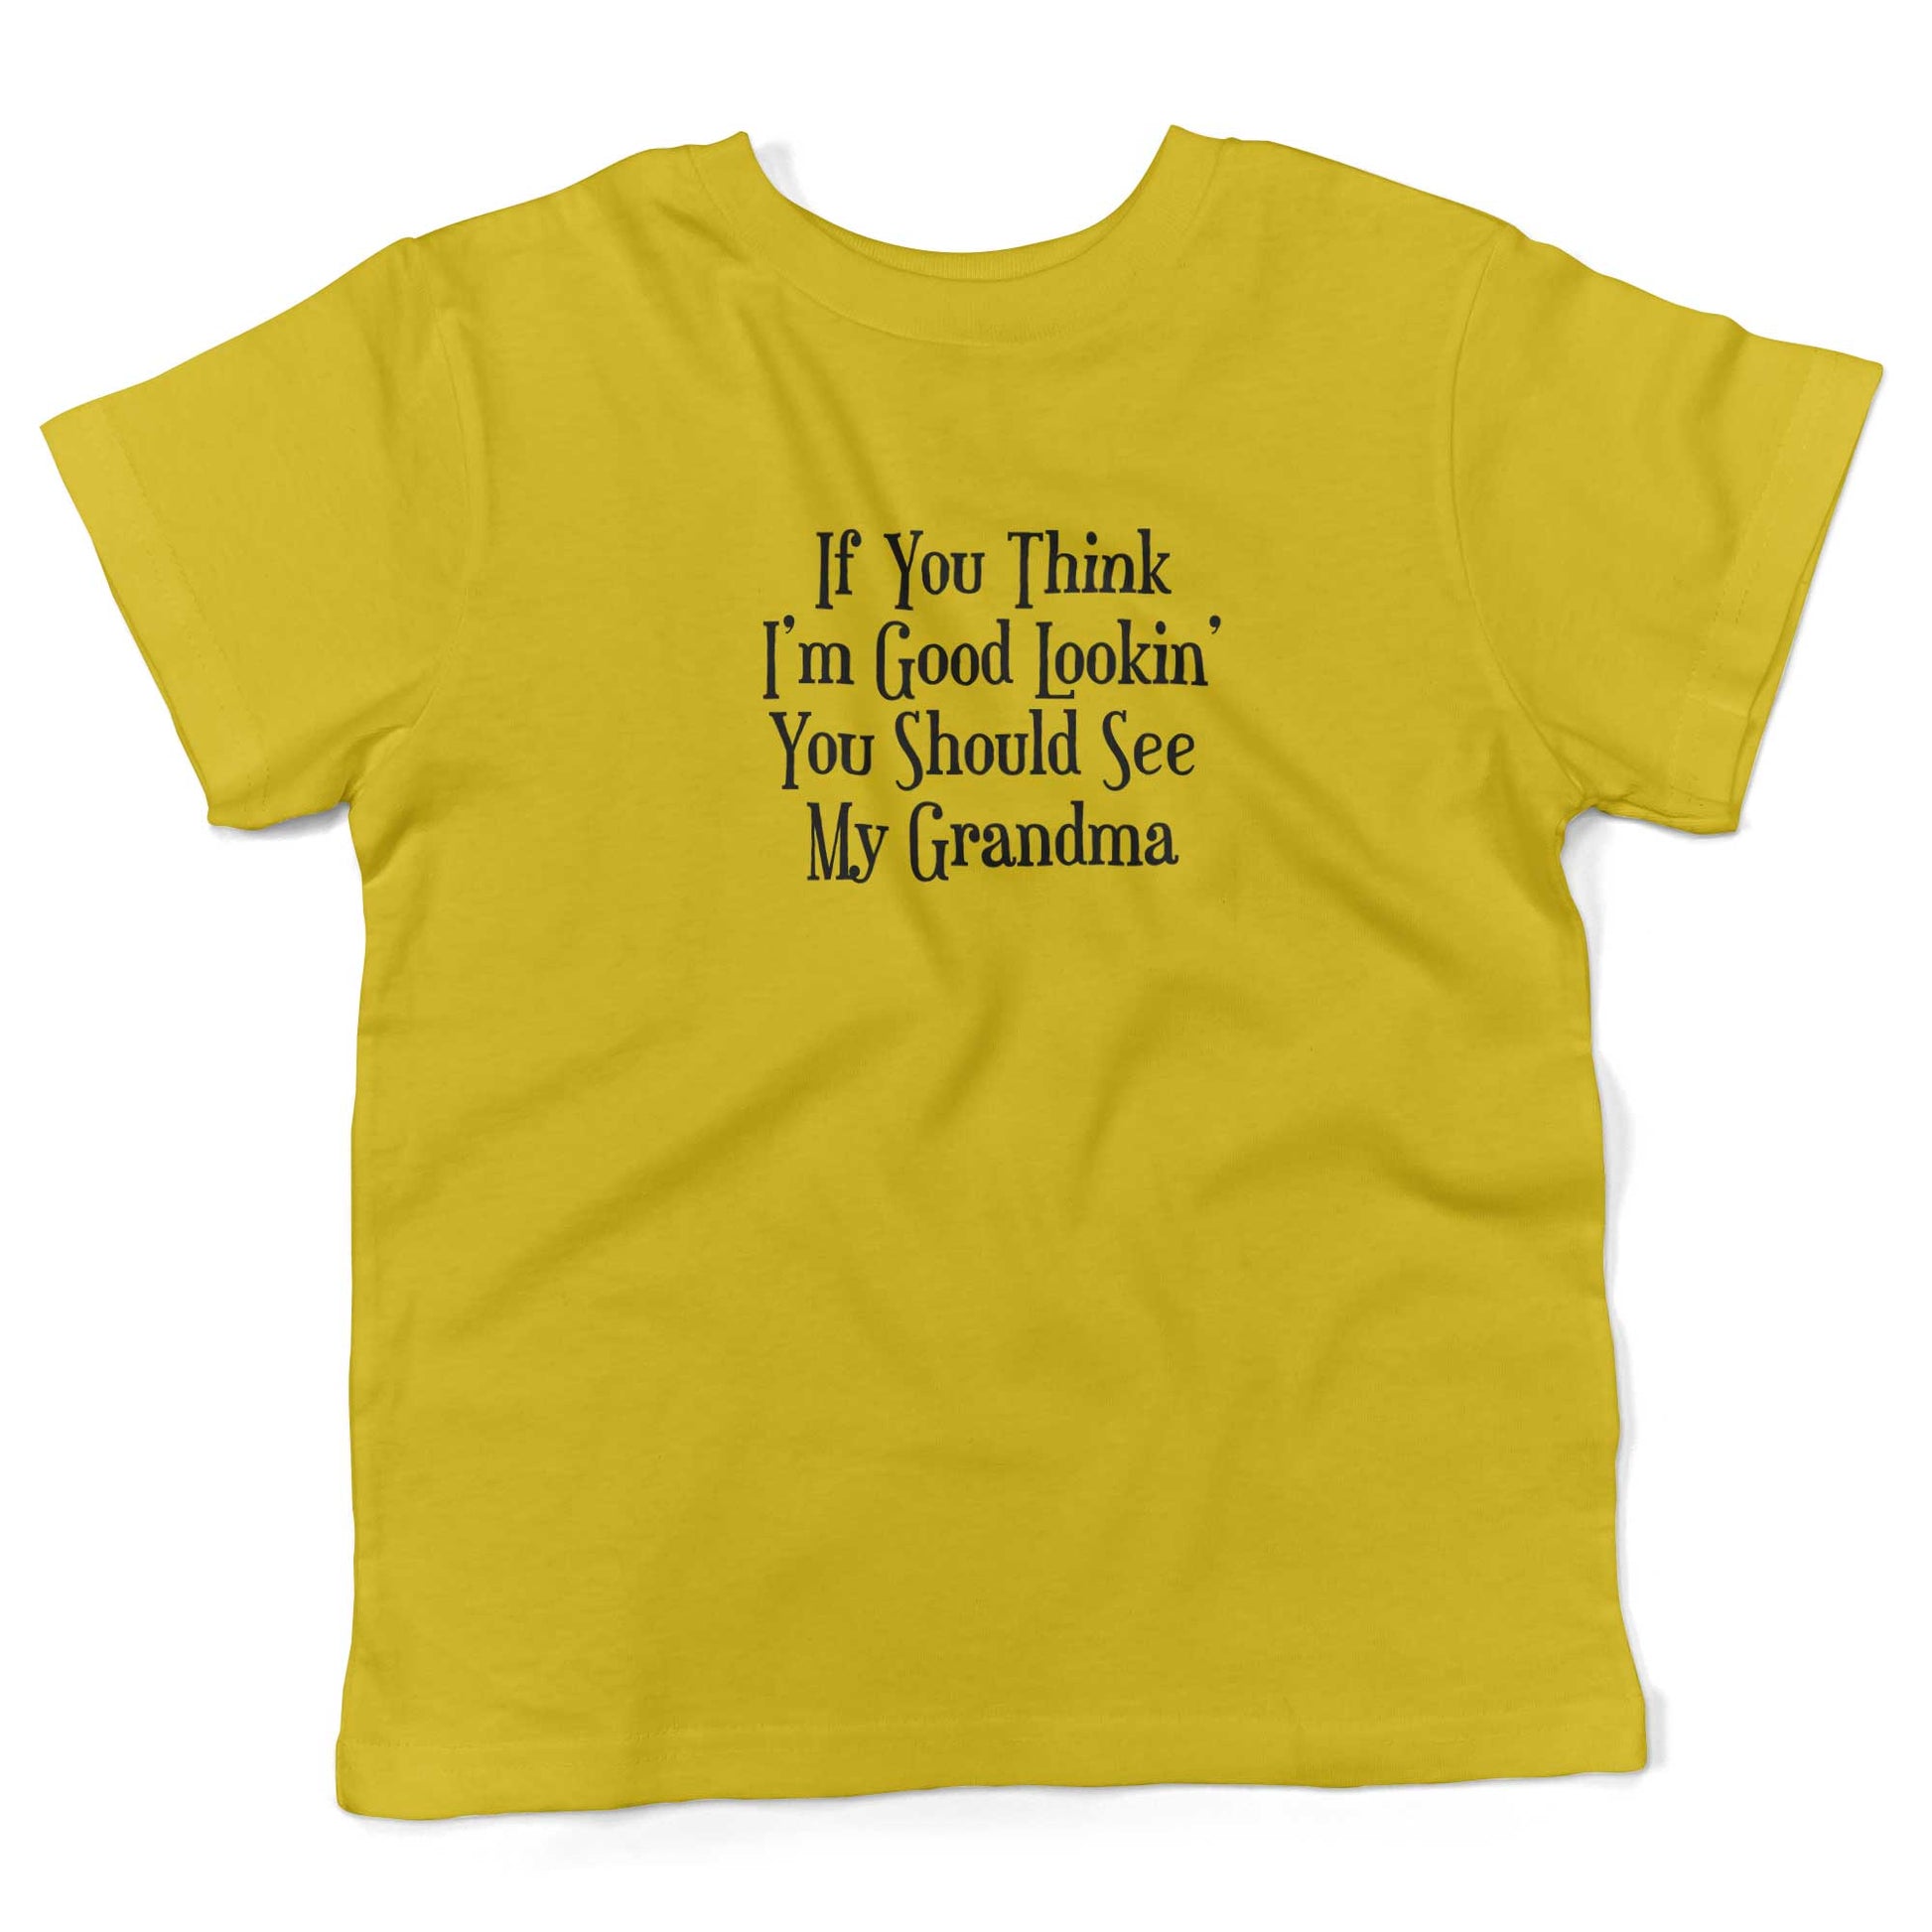 If You Think I'm Good Lookin', You Should See My Grandma Toddler Shirt-Sunshine Yellow-2T